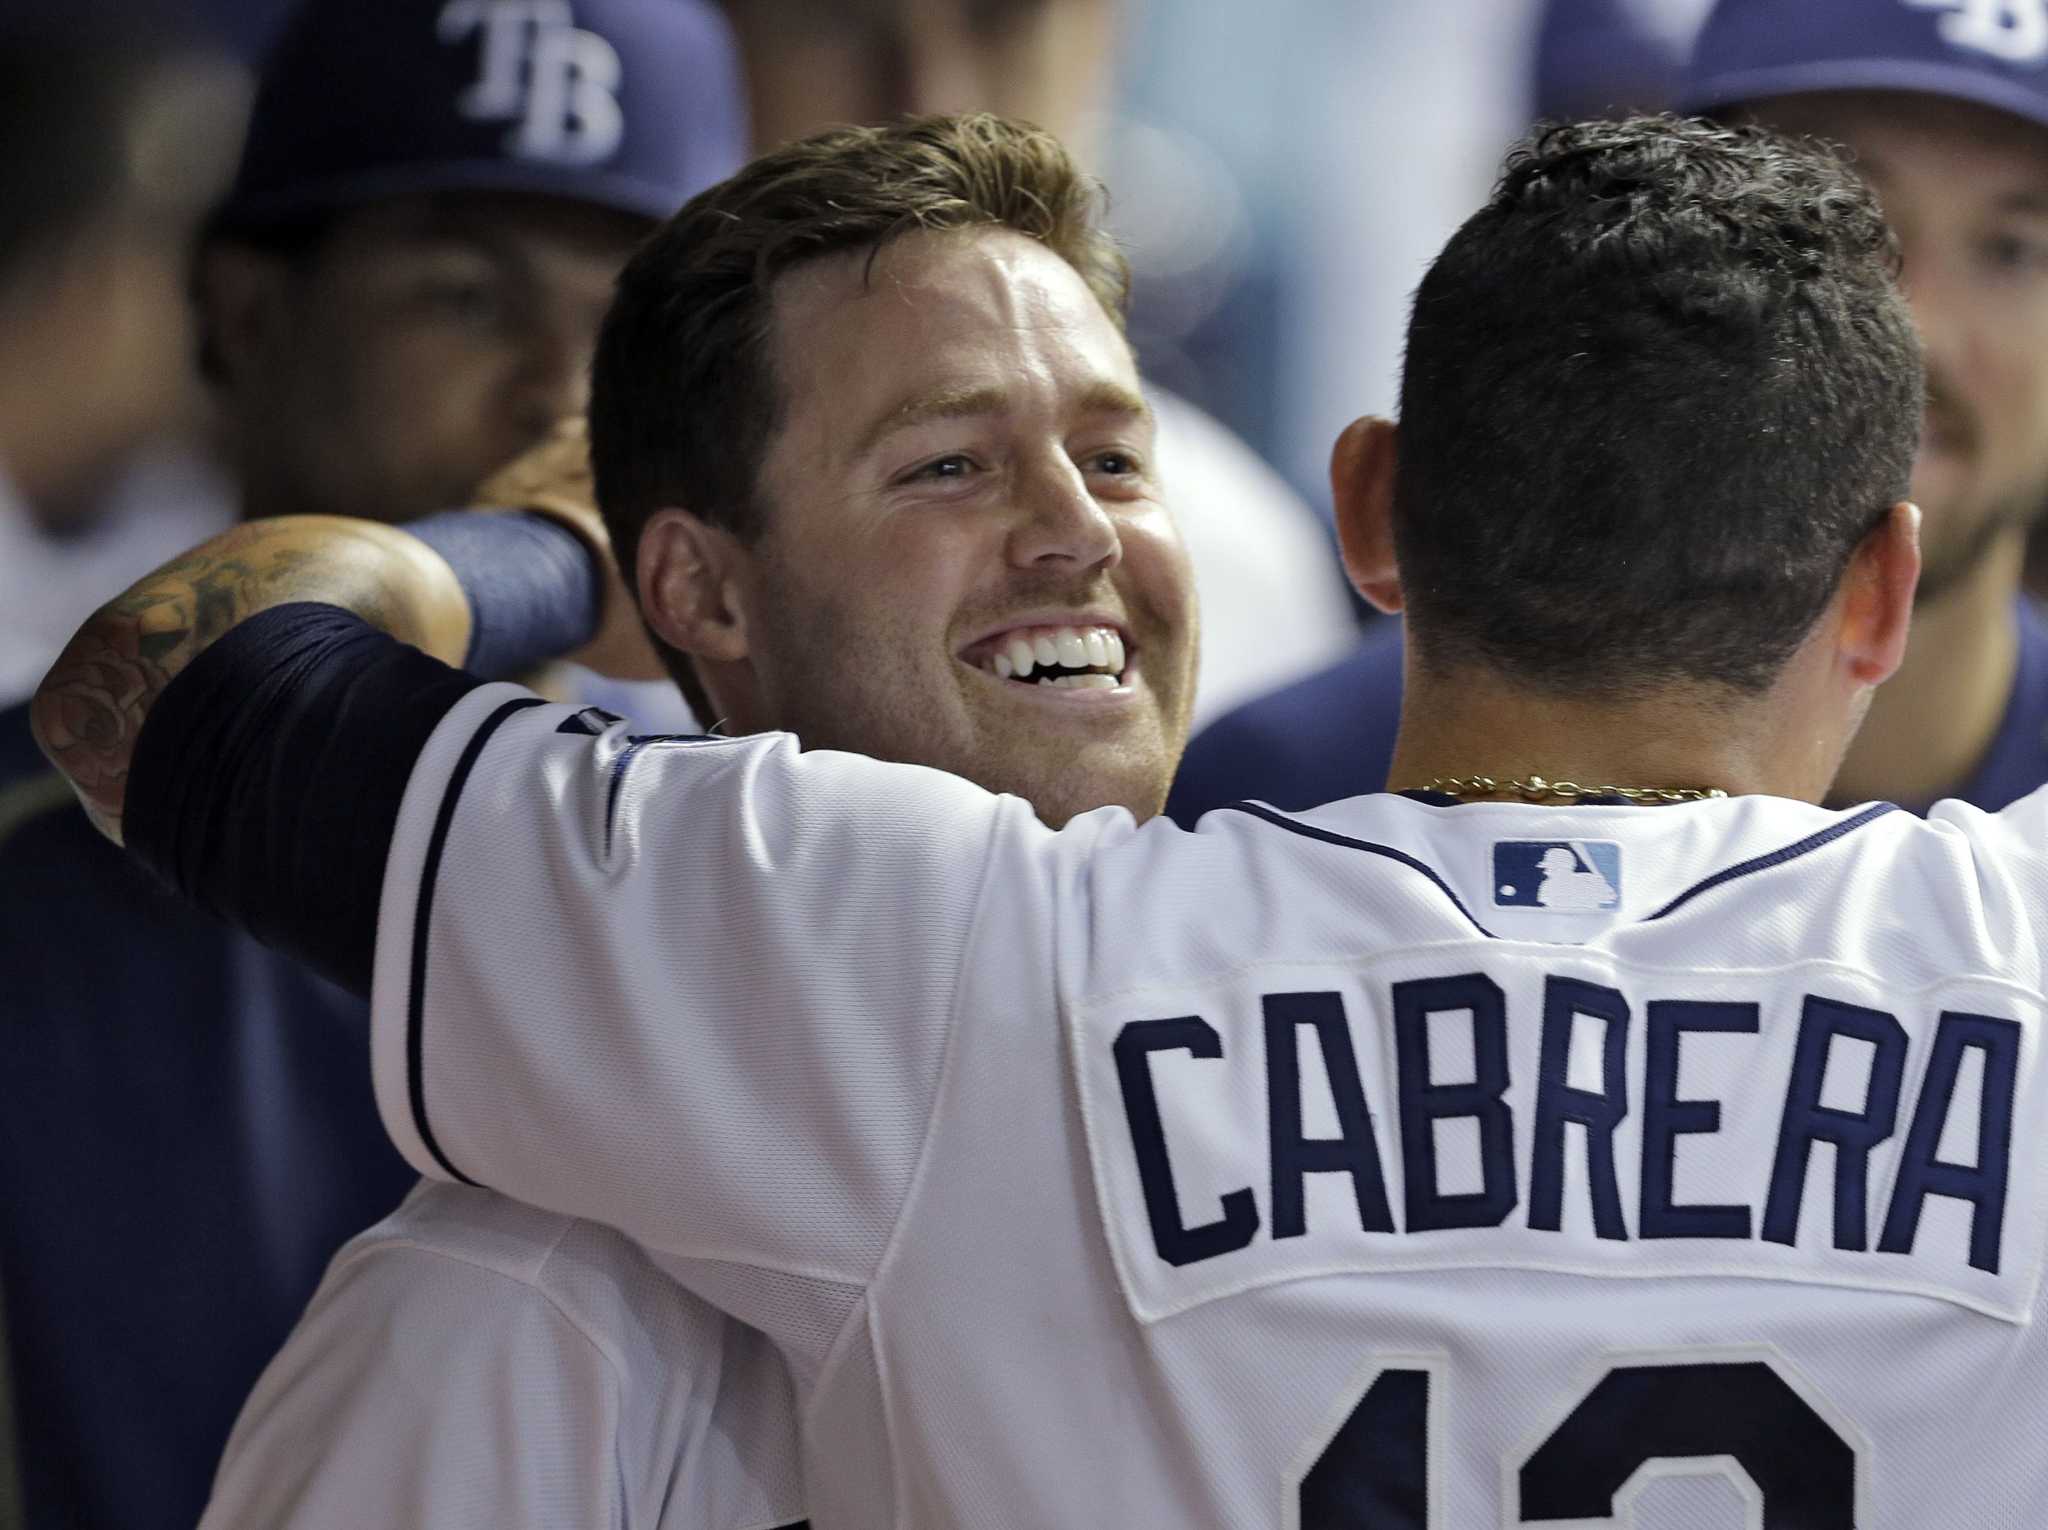 Mariners rally from 5-run deficit to beat Rays, 7-6, and take series from  MLB's best team